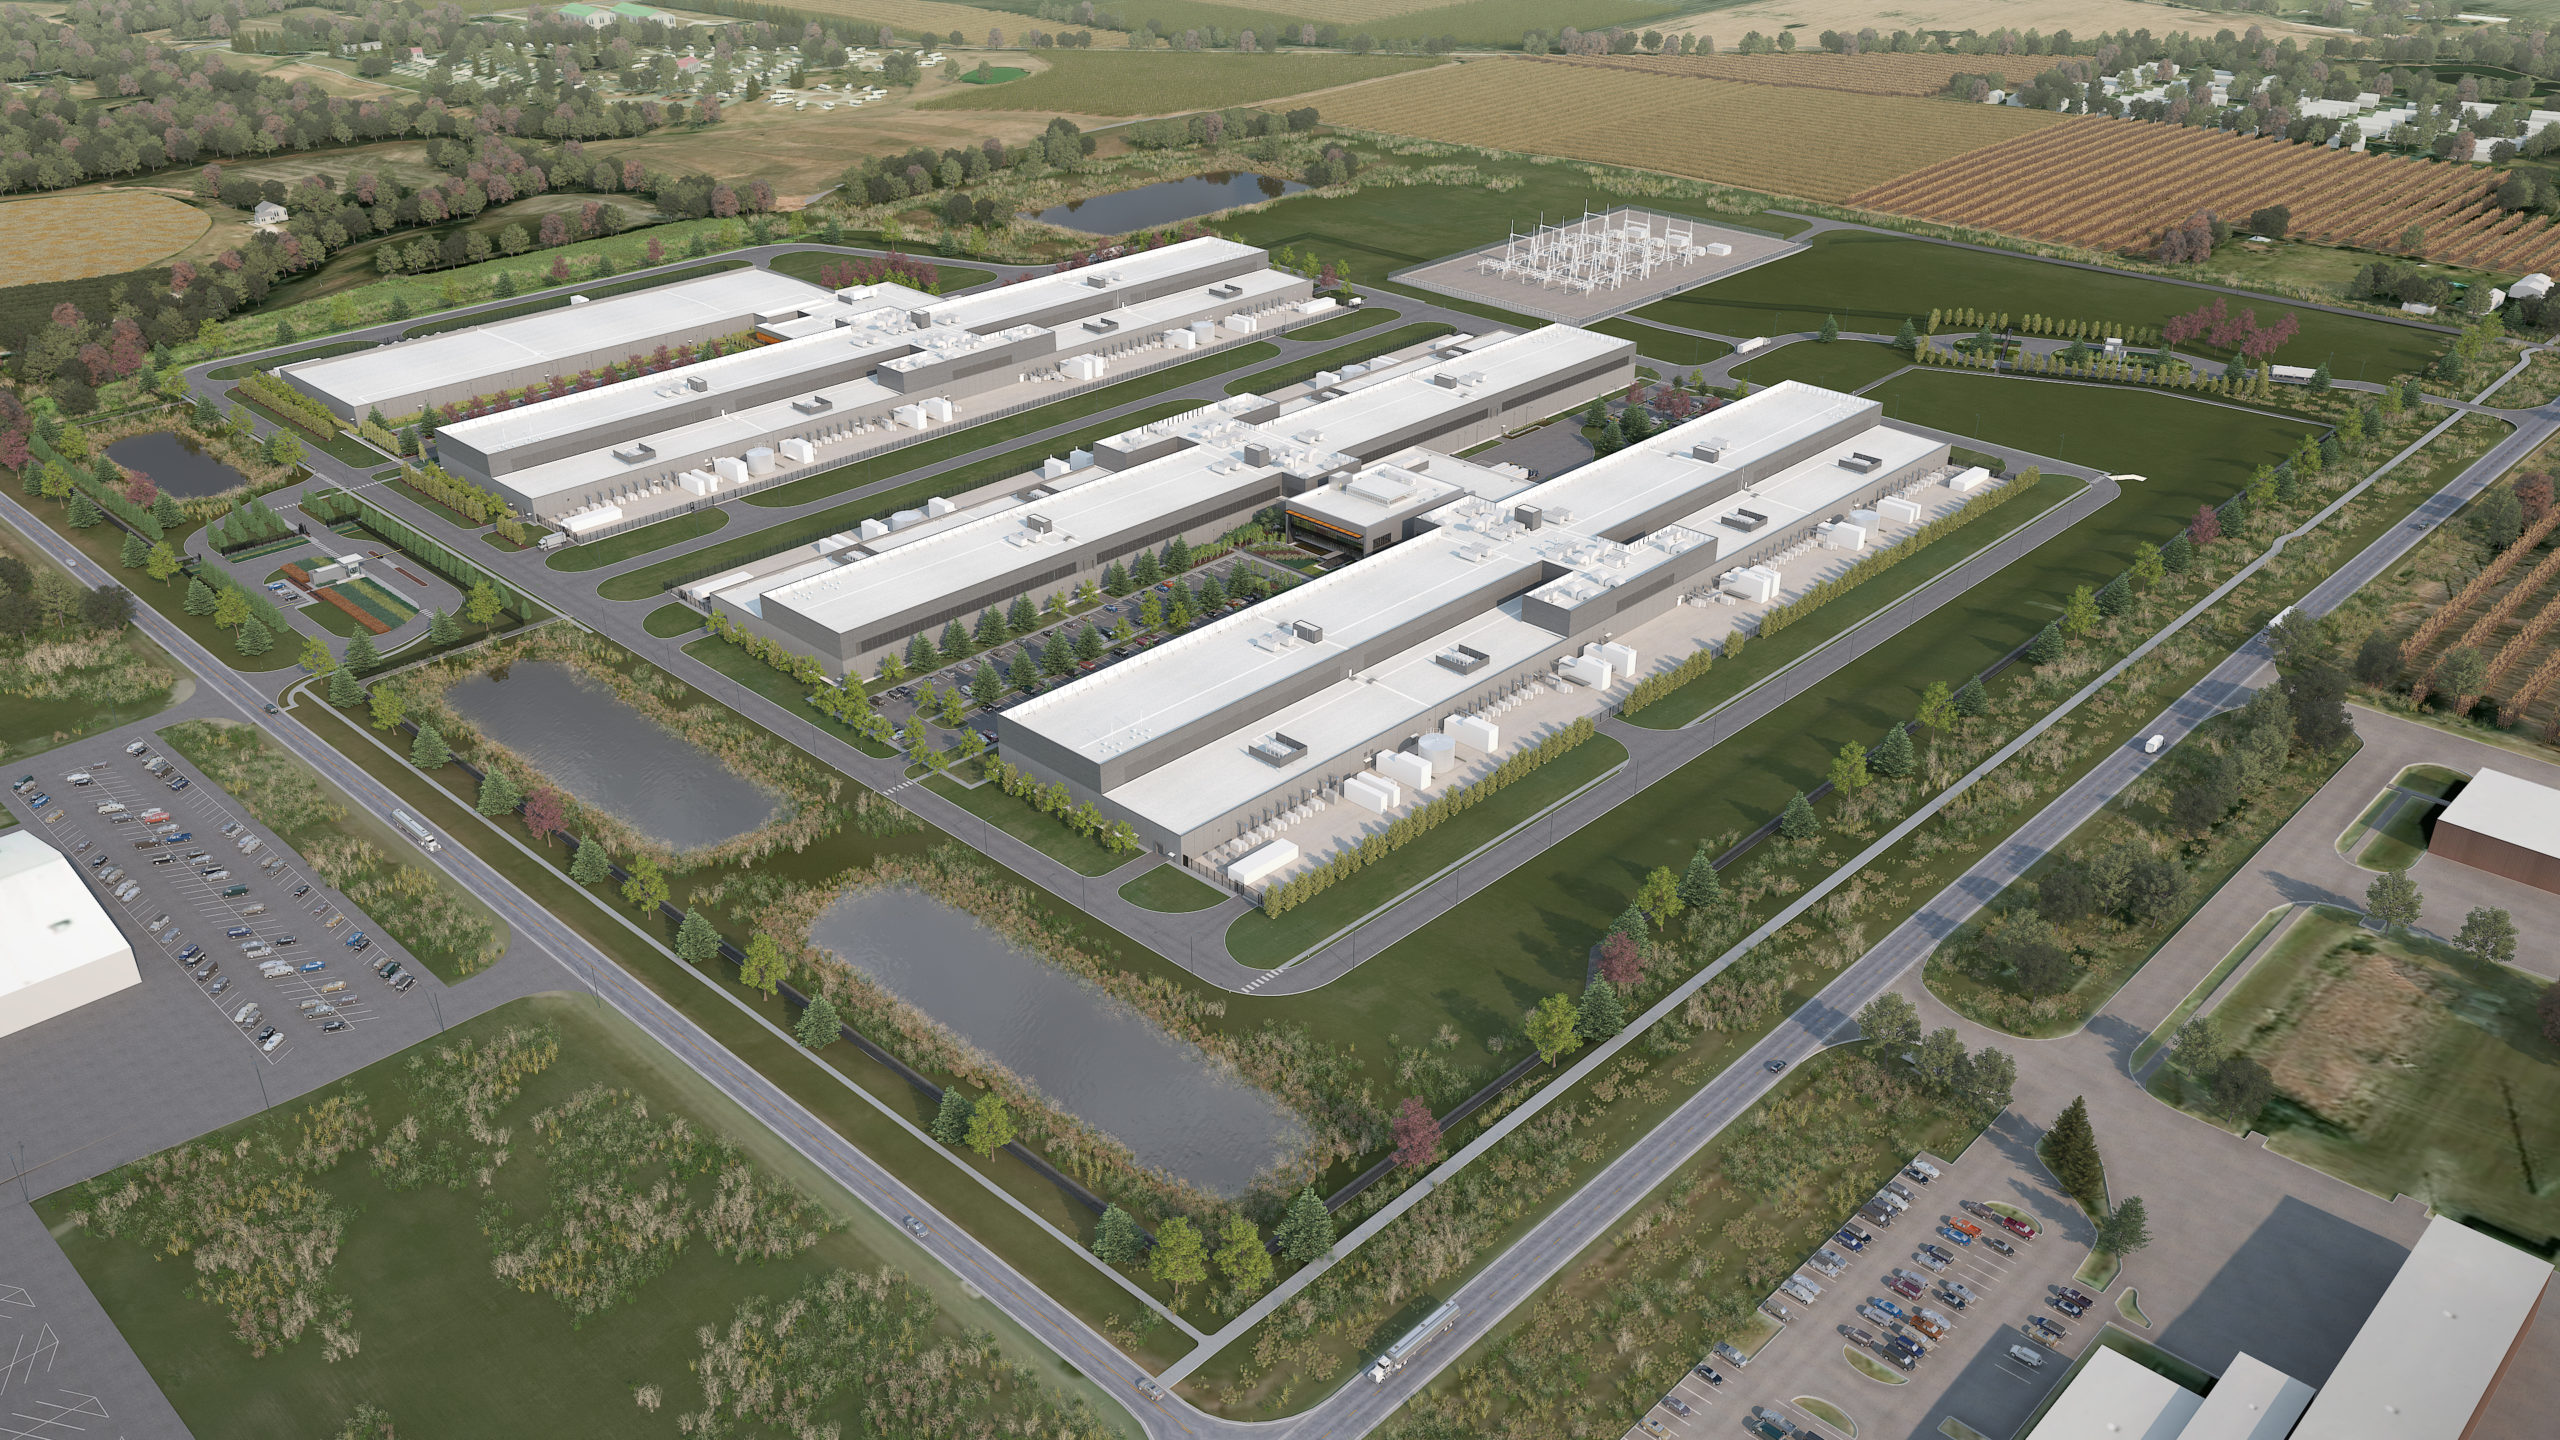 Final expansion to make Altoona Meta’s largest data center worldwide